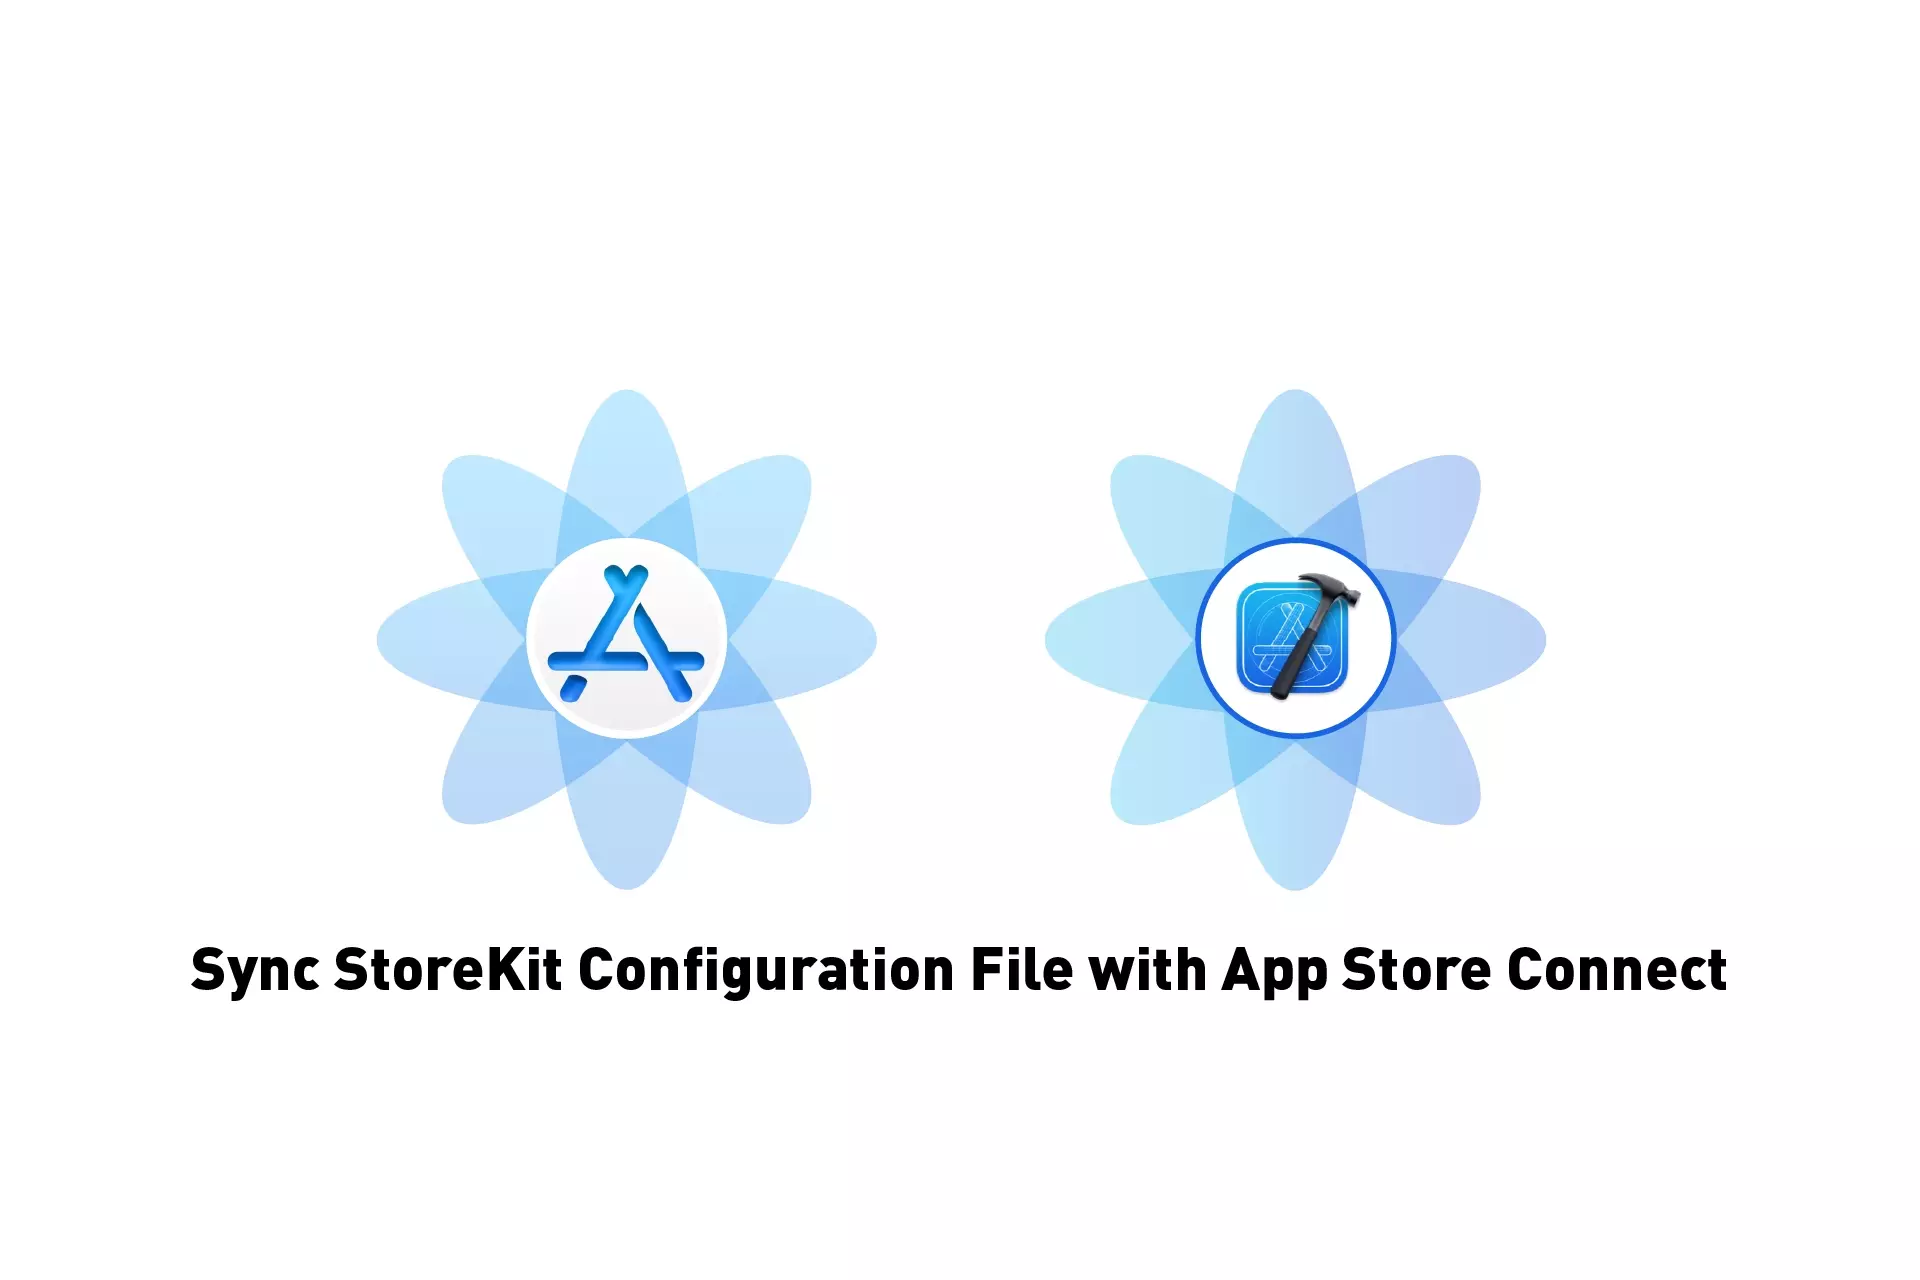 A flower that represents App Store Connect next to one that represents Xcode. Beneath them sits the text "Sync StoreKit Configuration File with App Store Connect."